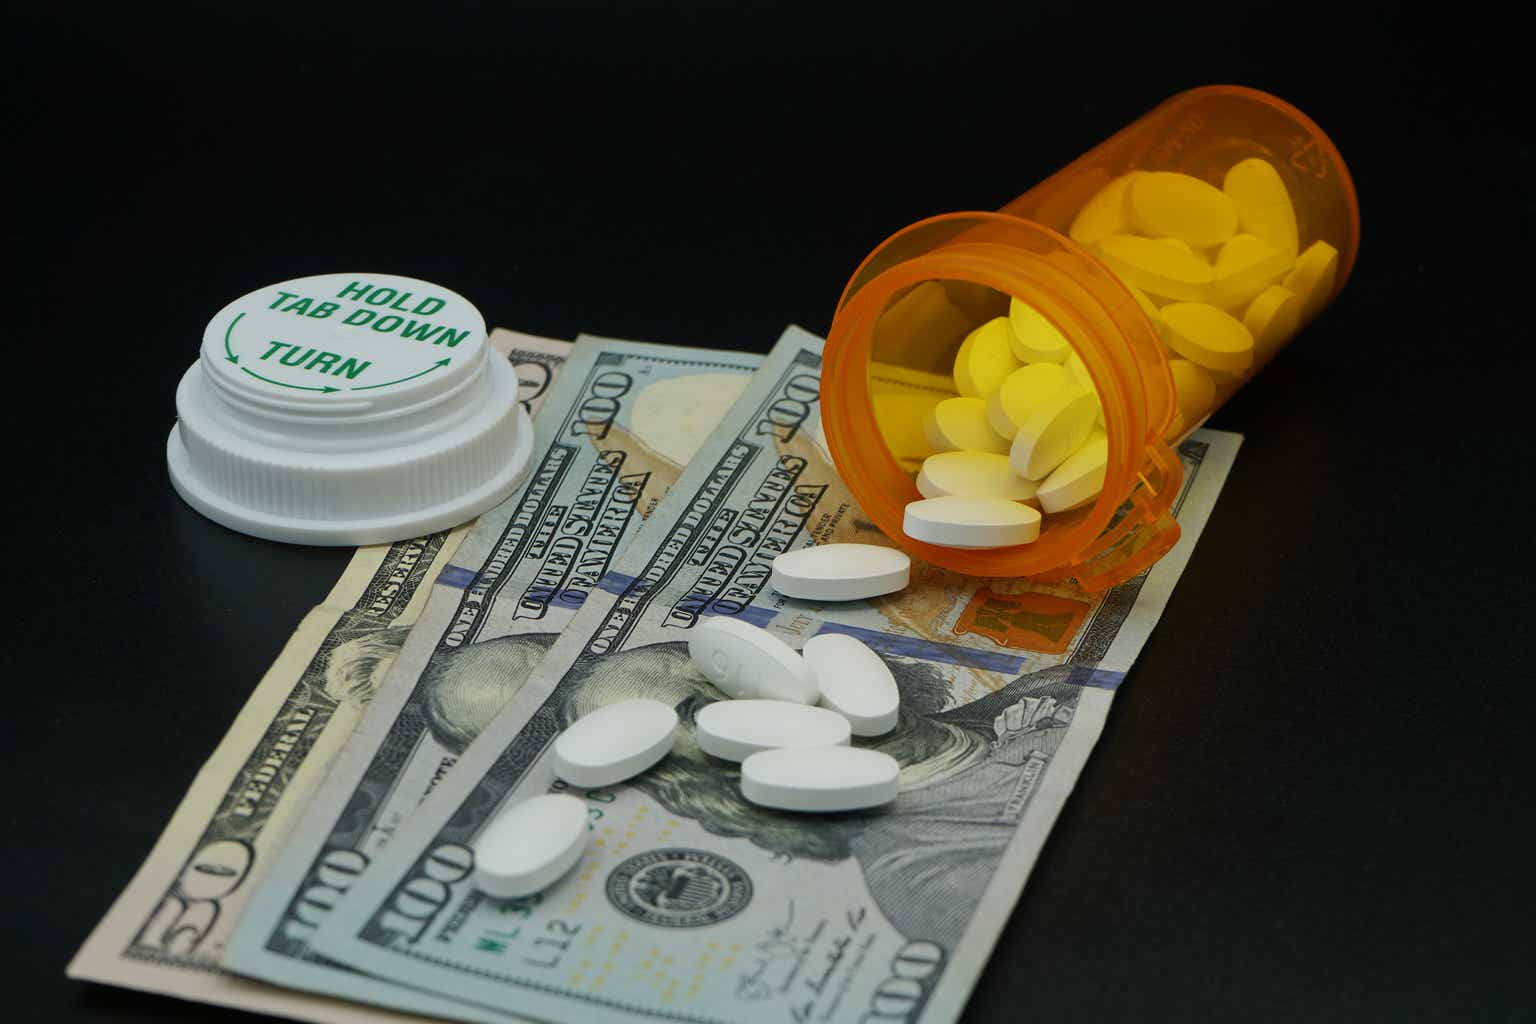 the-public-weighs-in-on-medicare-drug-negotiations-kff